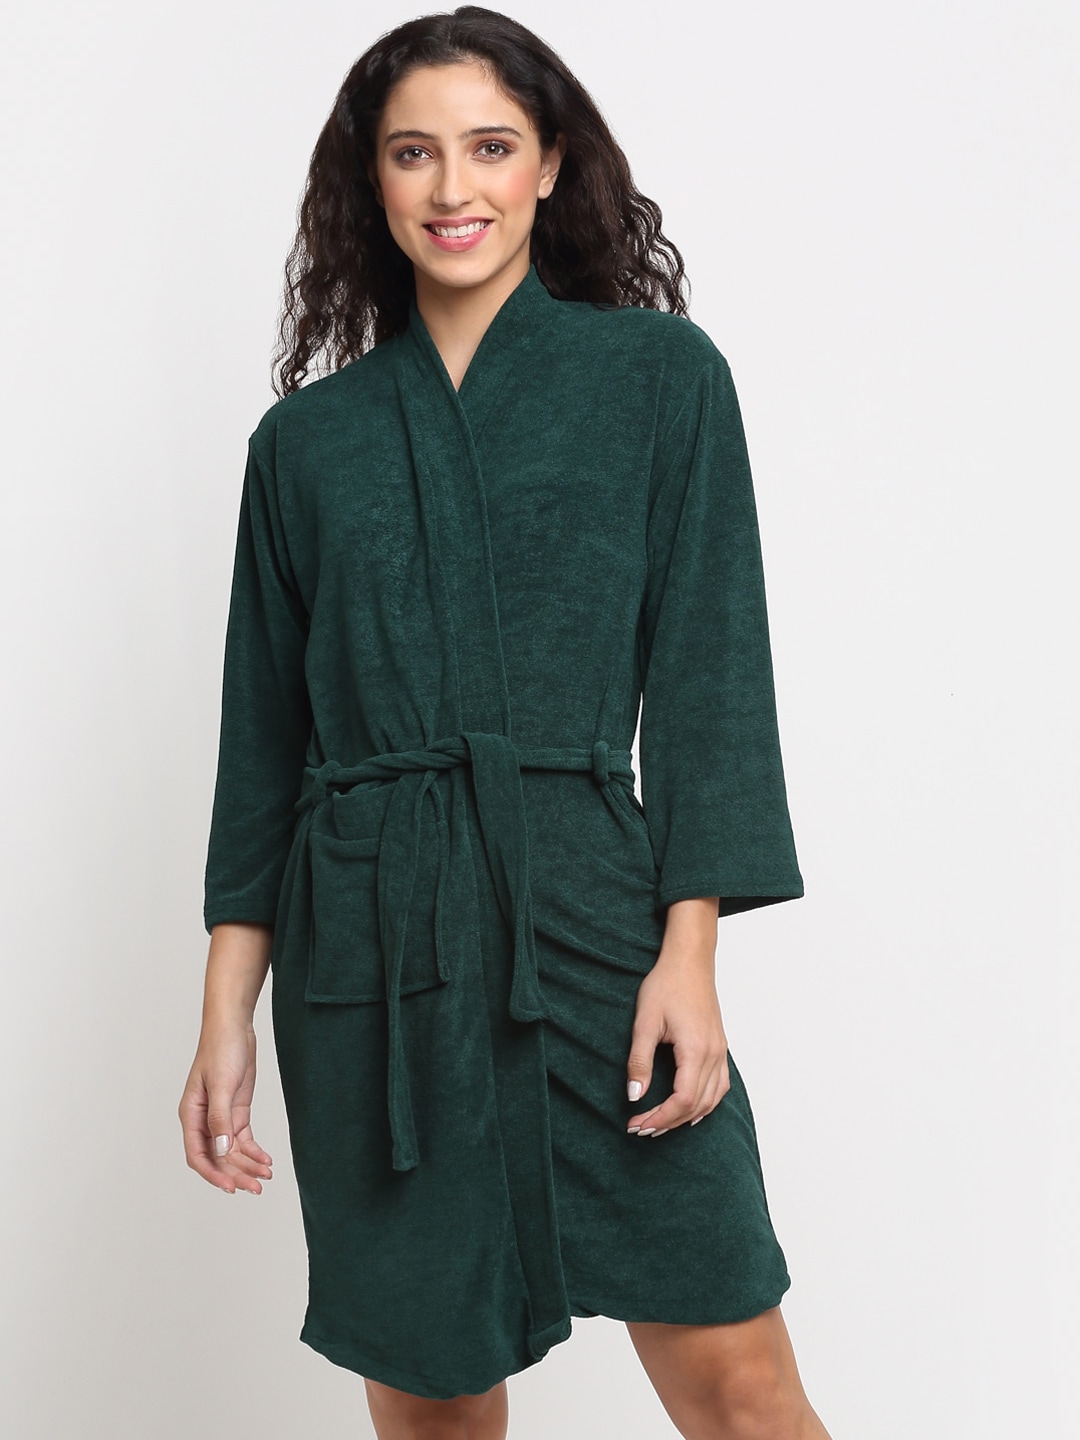 LacyLook Women Green Solid Bath Robe Price in India